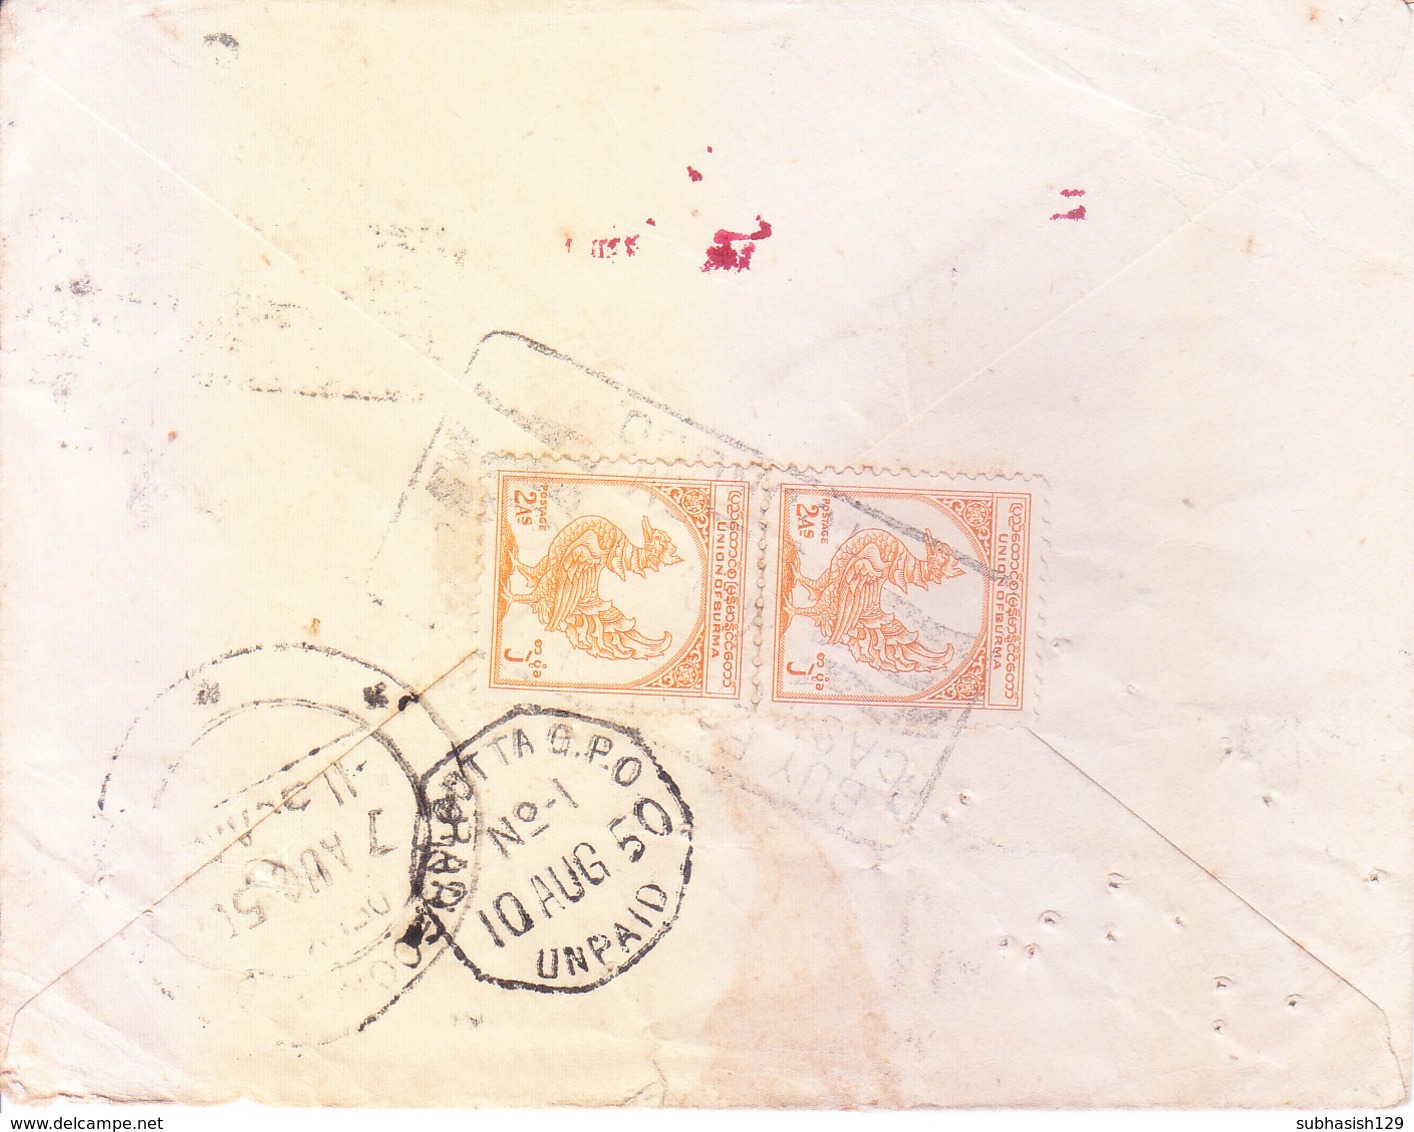 BURMA 1950 COMMERCIAL COVER - FOREIGN POSTAGE DUE MARKING AT TOUNGOO AND UNPAID MARKING AT CALCUTTA GPO - RARE & SCARCE - Myanmar (Burma 1948-...)